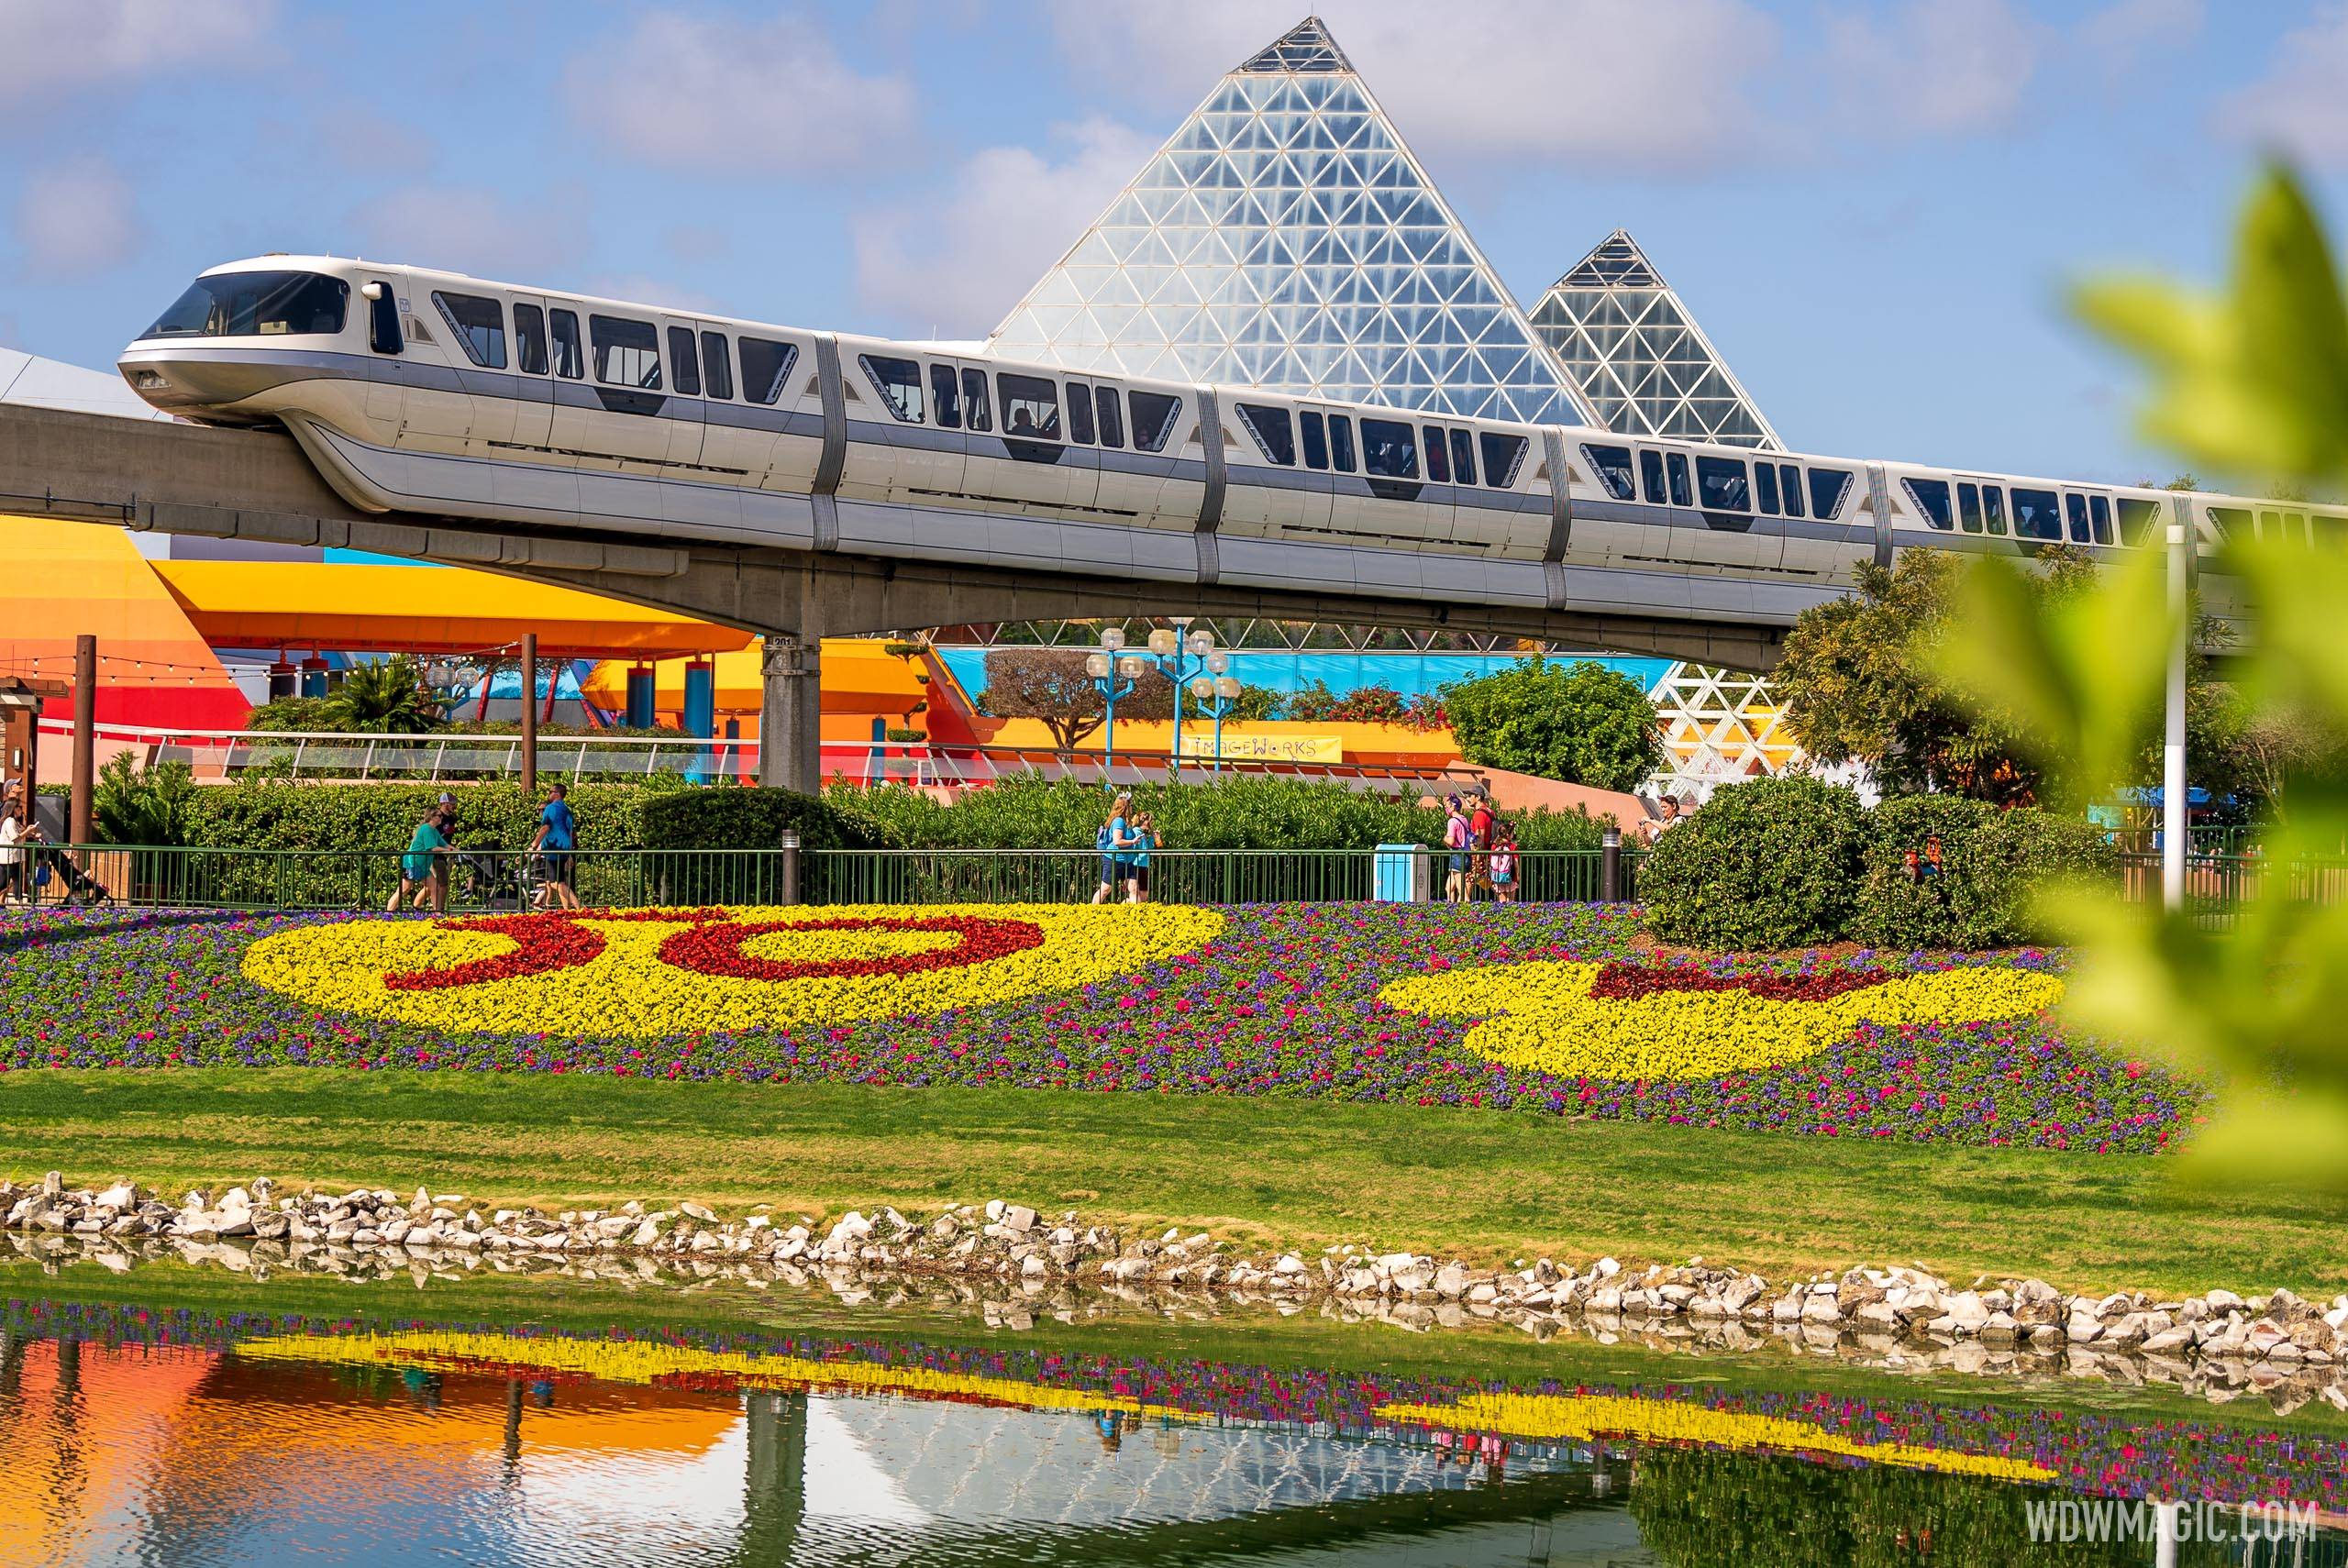 Flower Beds at the 2020 EPCOT International Flower and Garden Festival